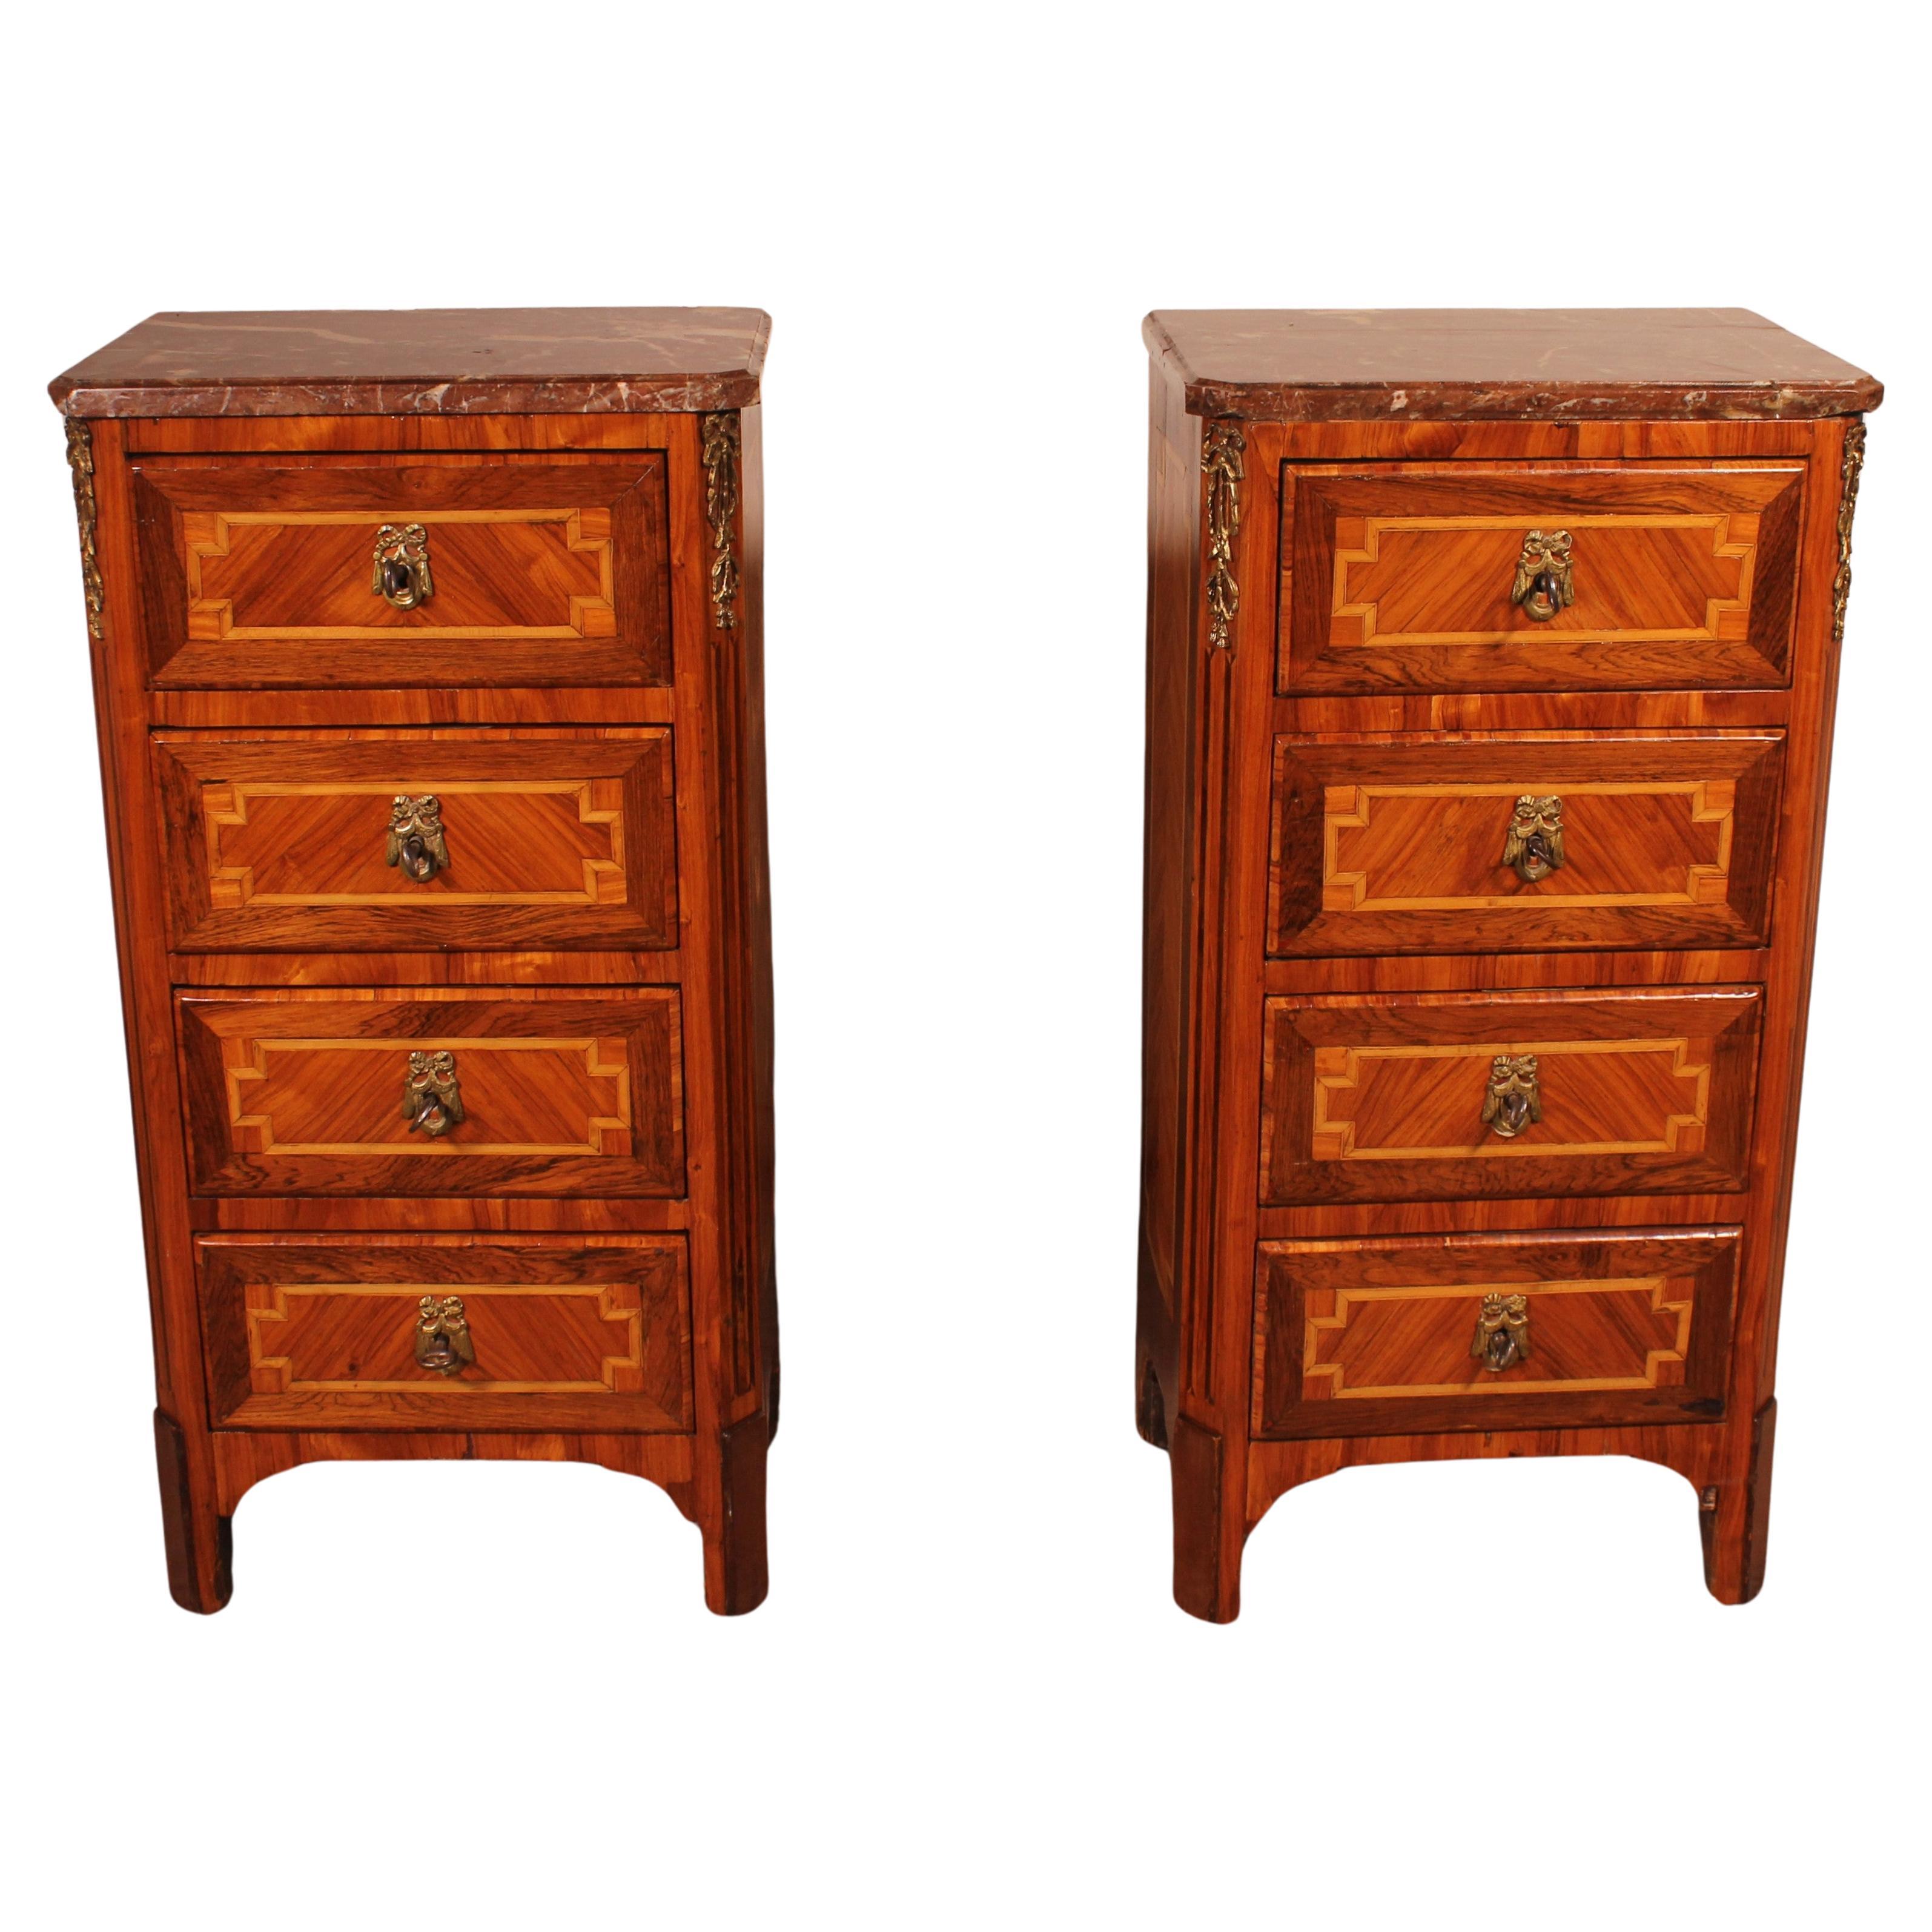 Pair Of Marquetry Bedside Tables - 18th Century From France For Sale